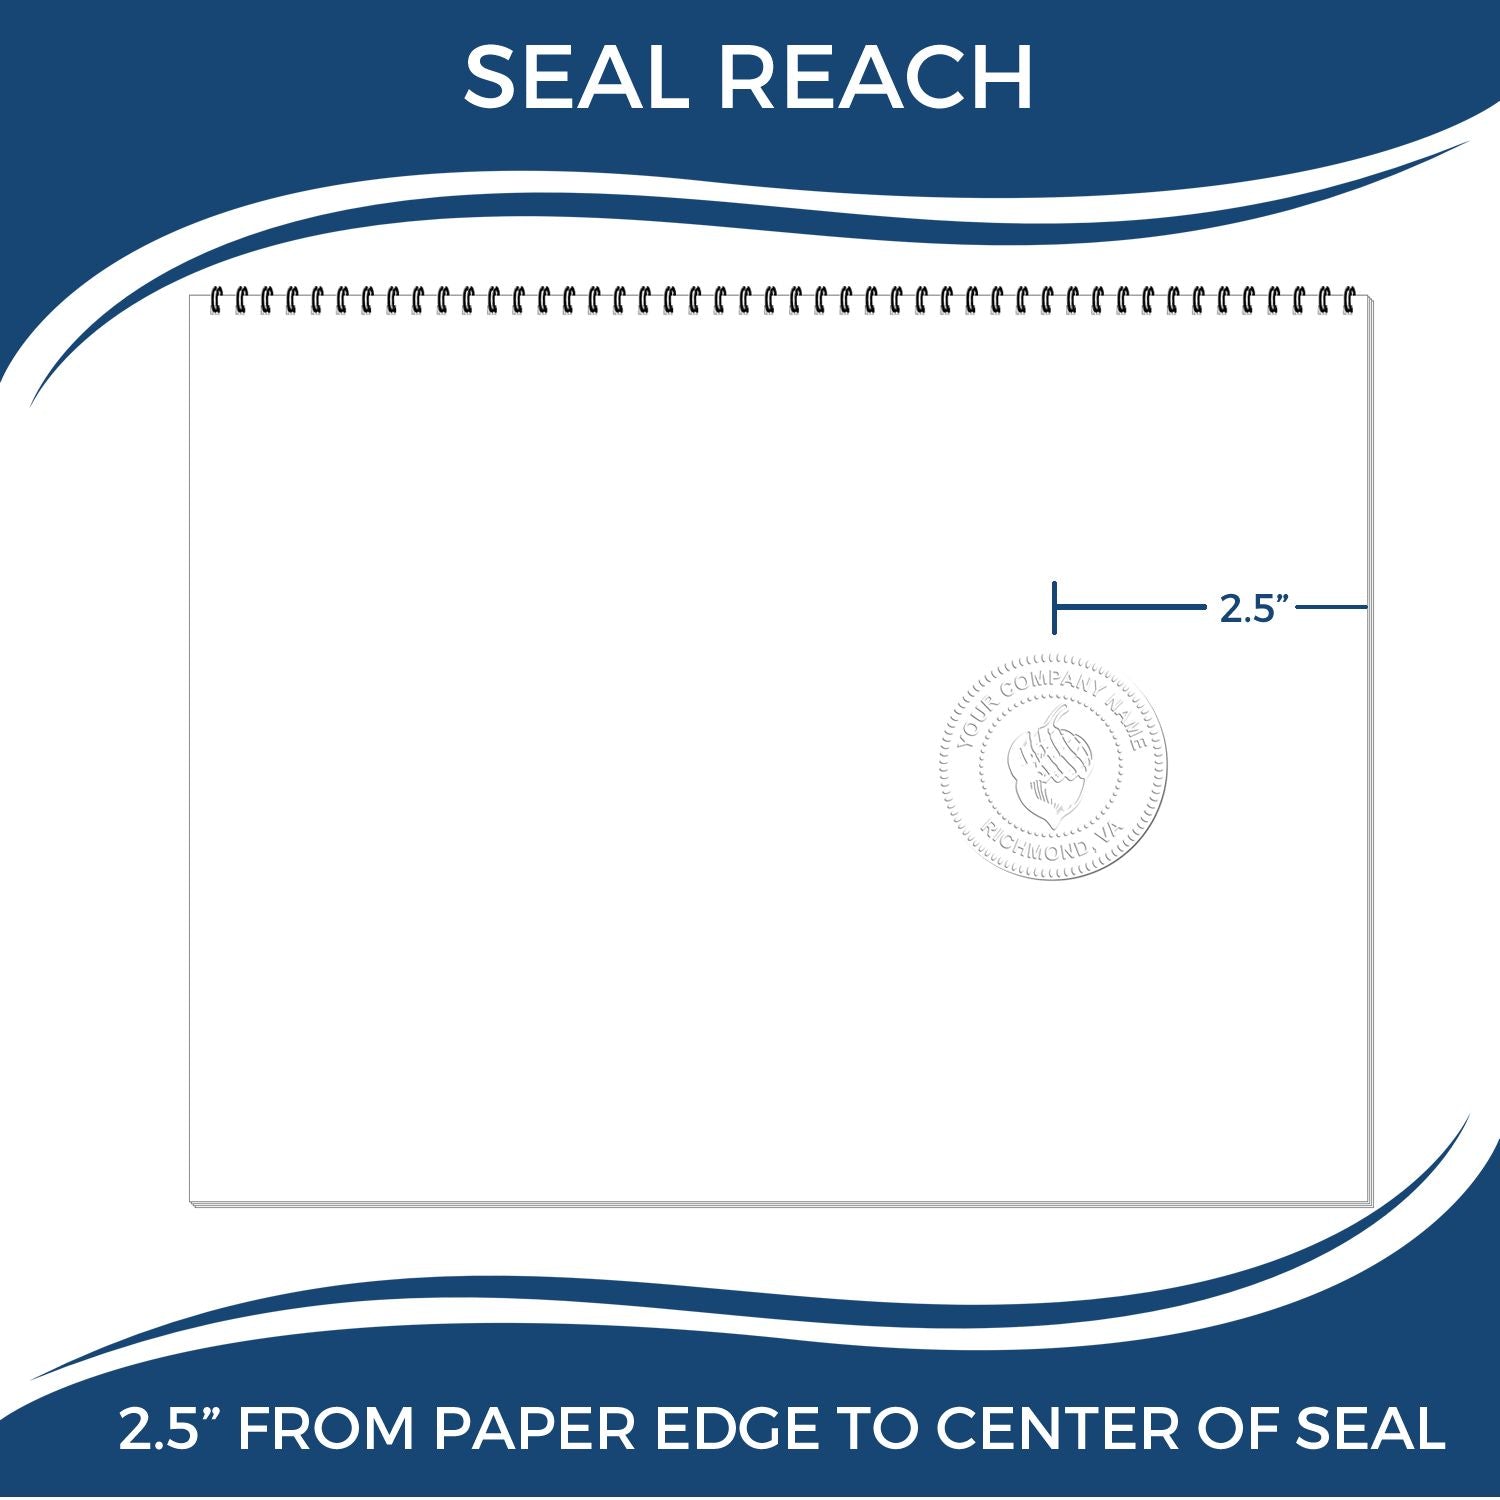 An infographic showing the seal reach which is represented by a ruler and a miniature seal image of the Heavy Duty Cast Iron Iowa Engineer Seal Embosser